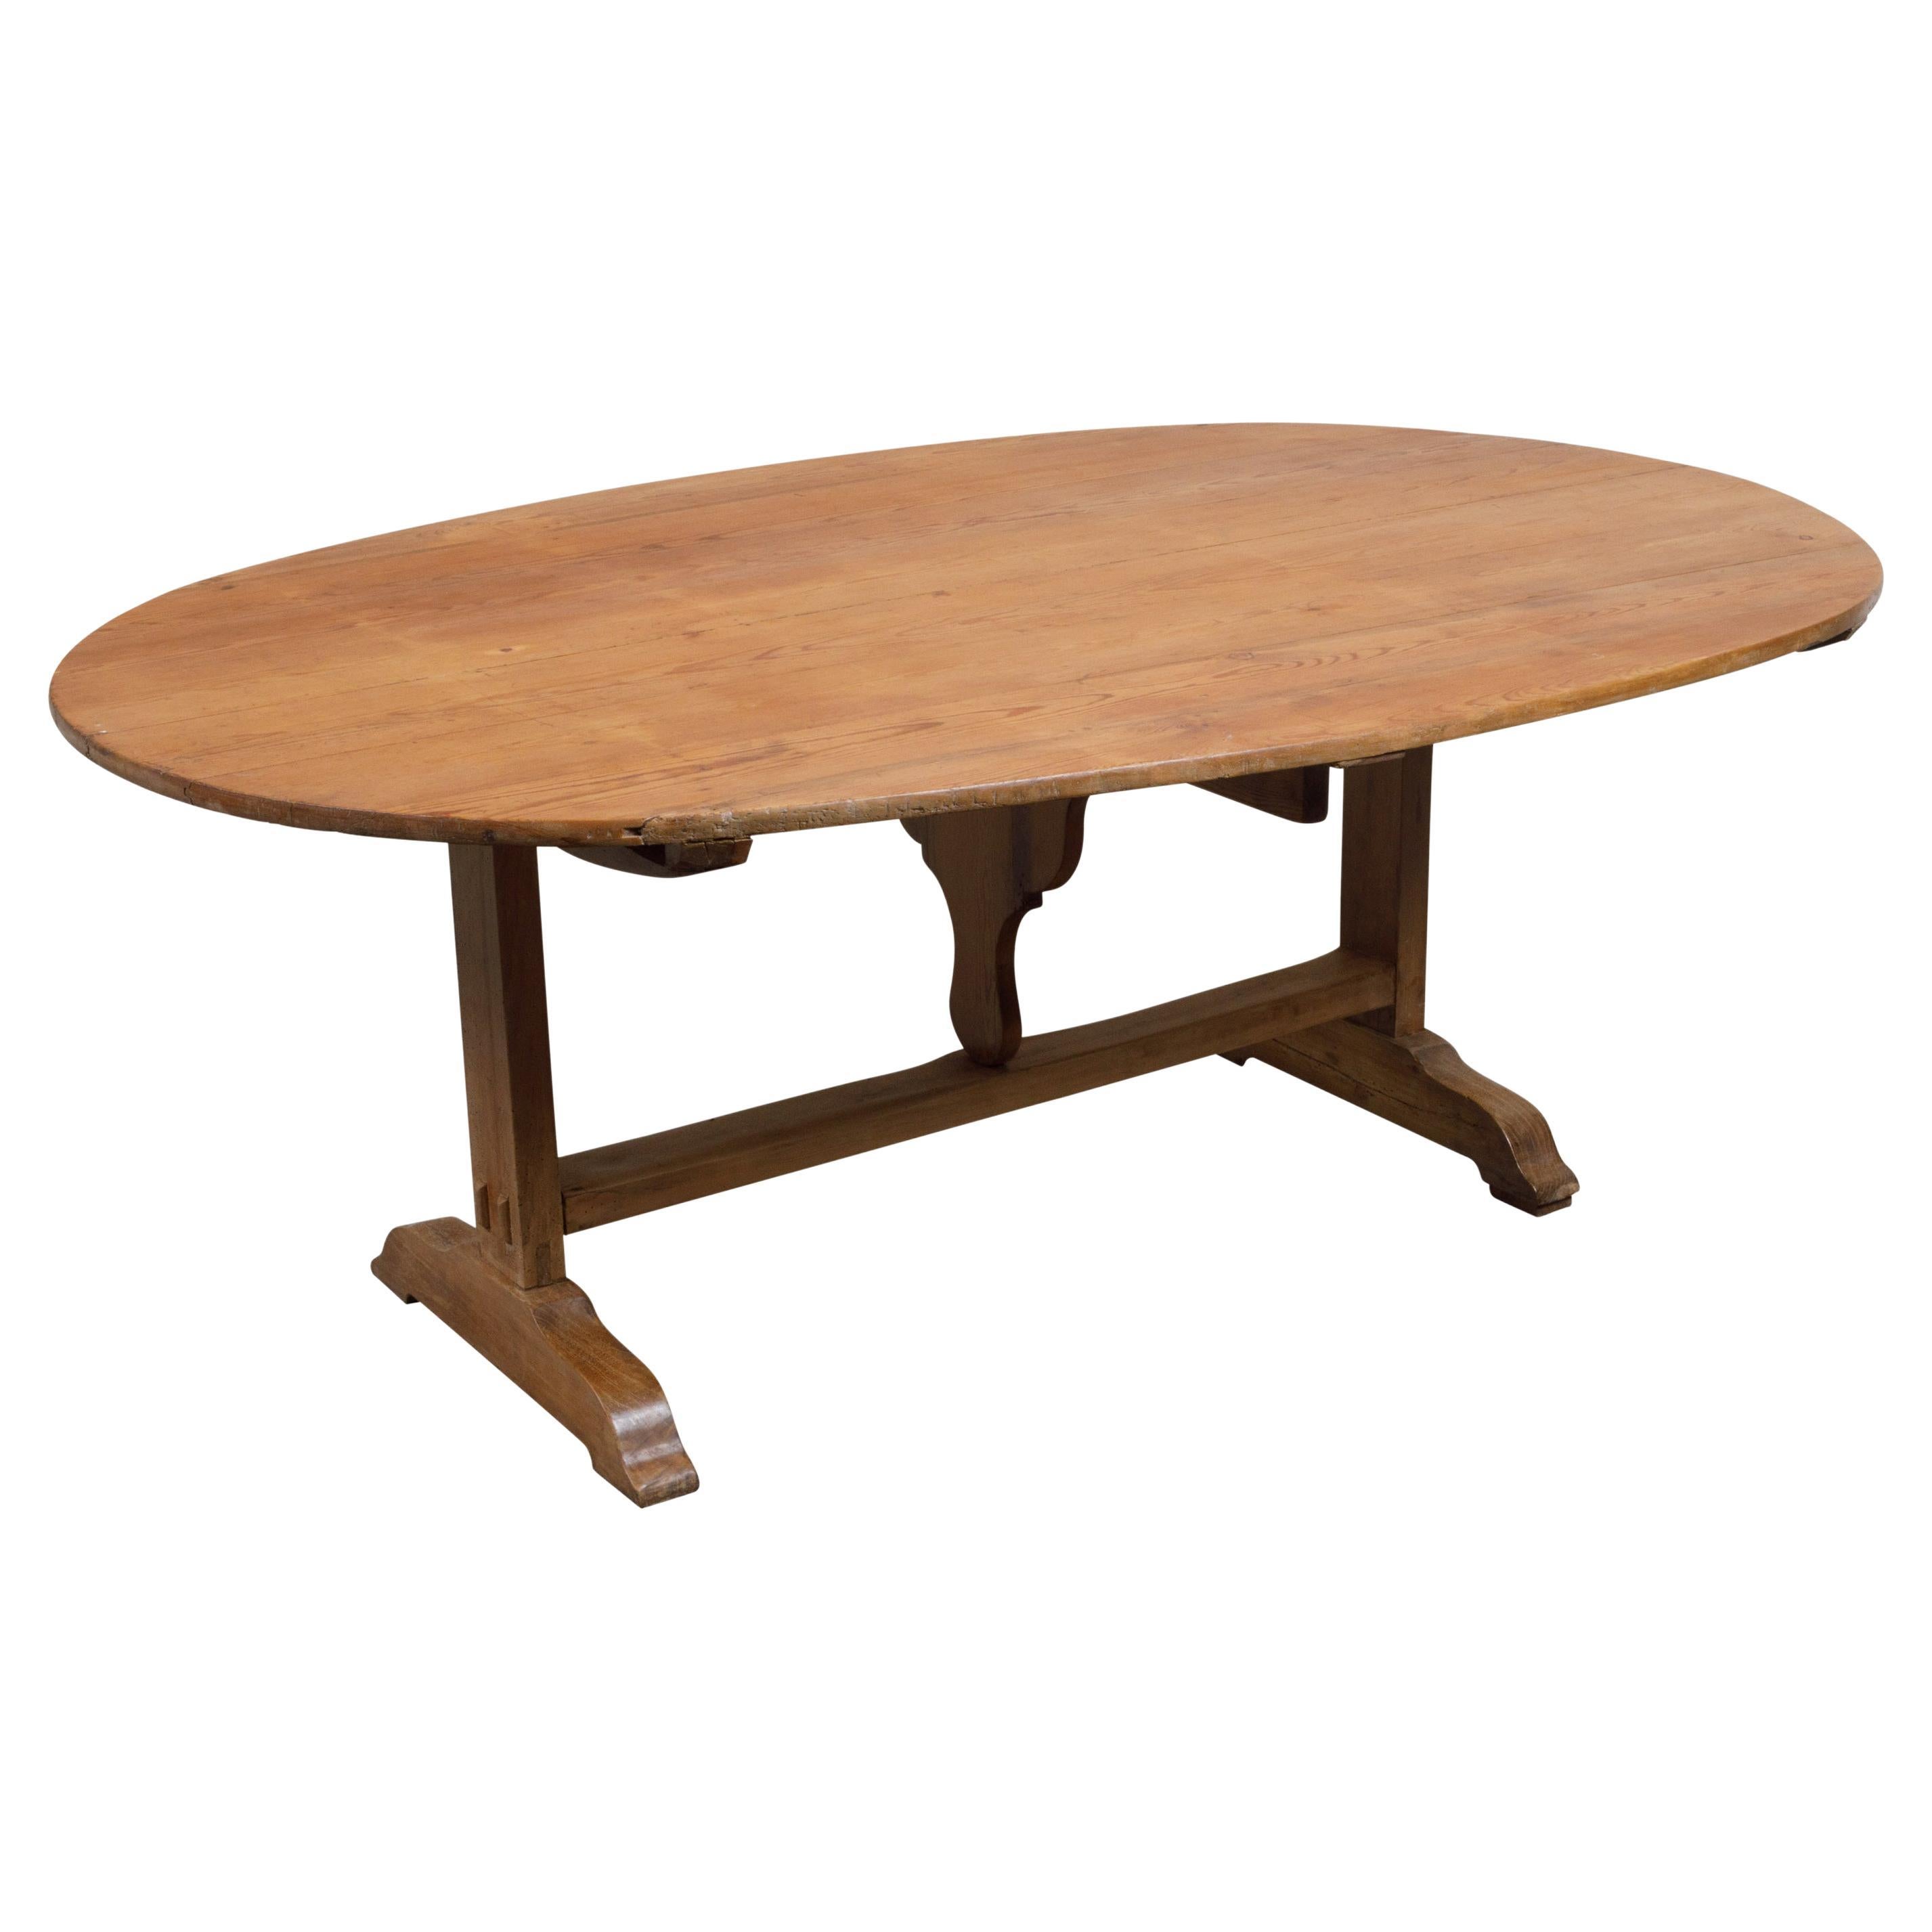 French 19th Century Rustic Walnut Farm Table with Oval Tilt Top and Trestle Base